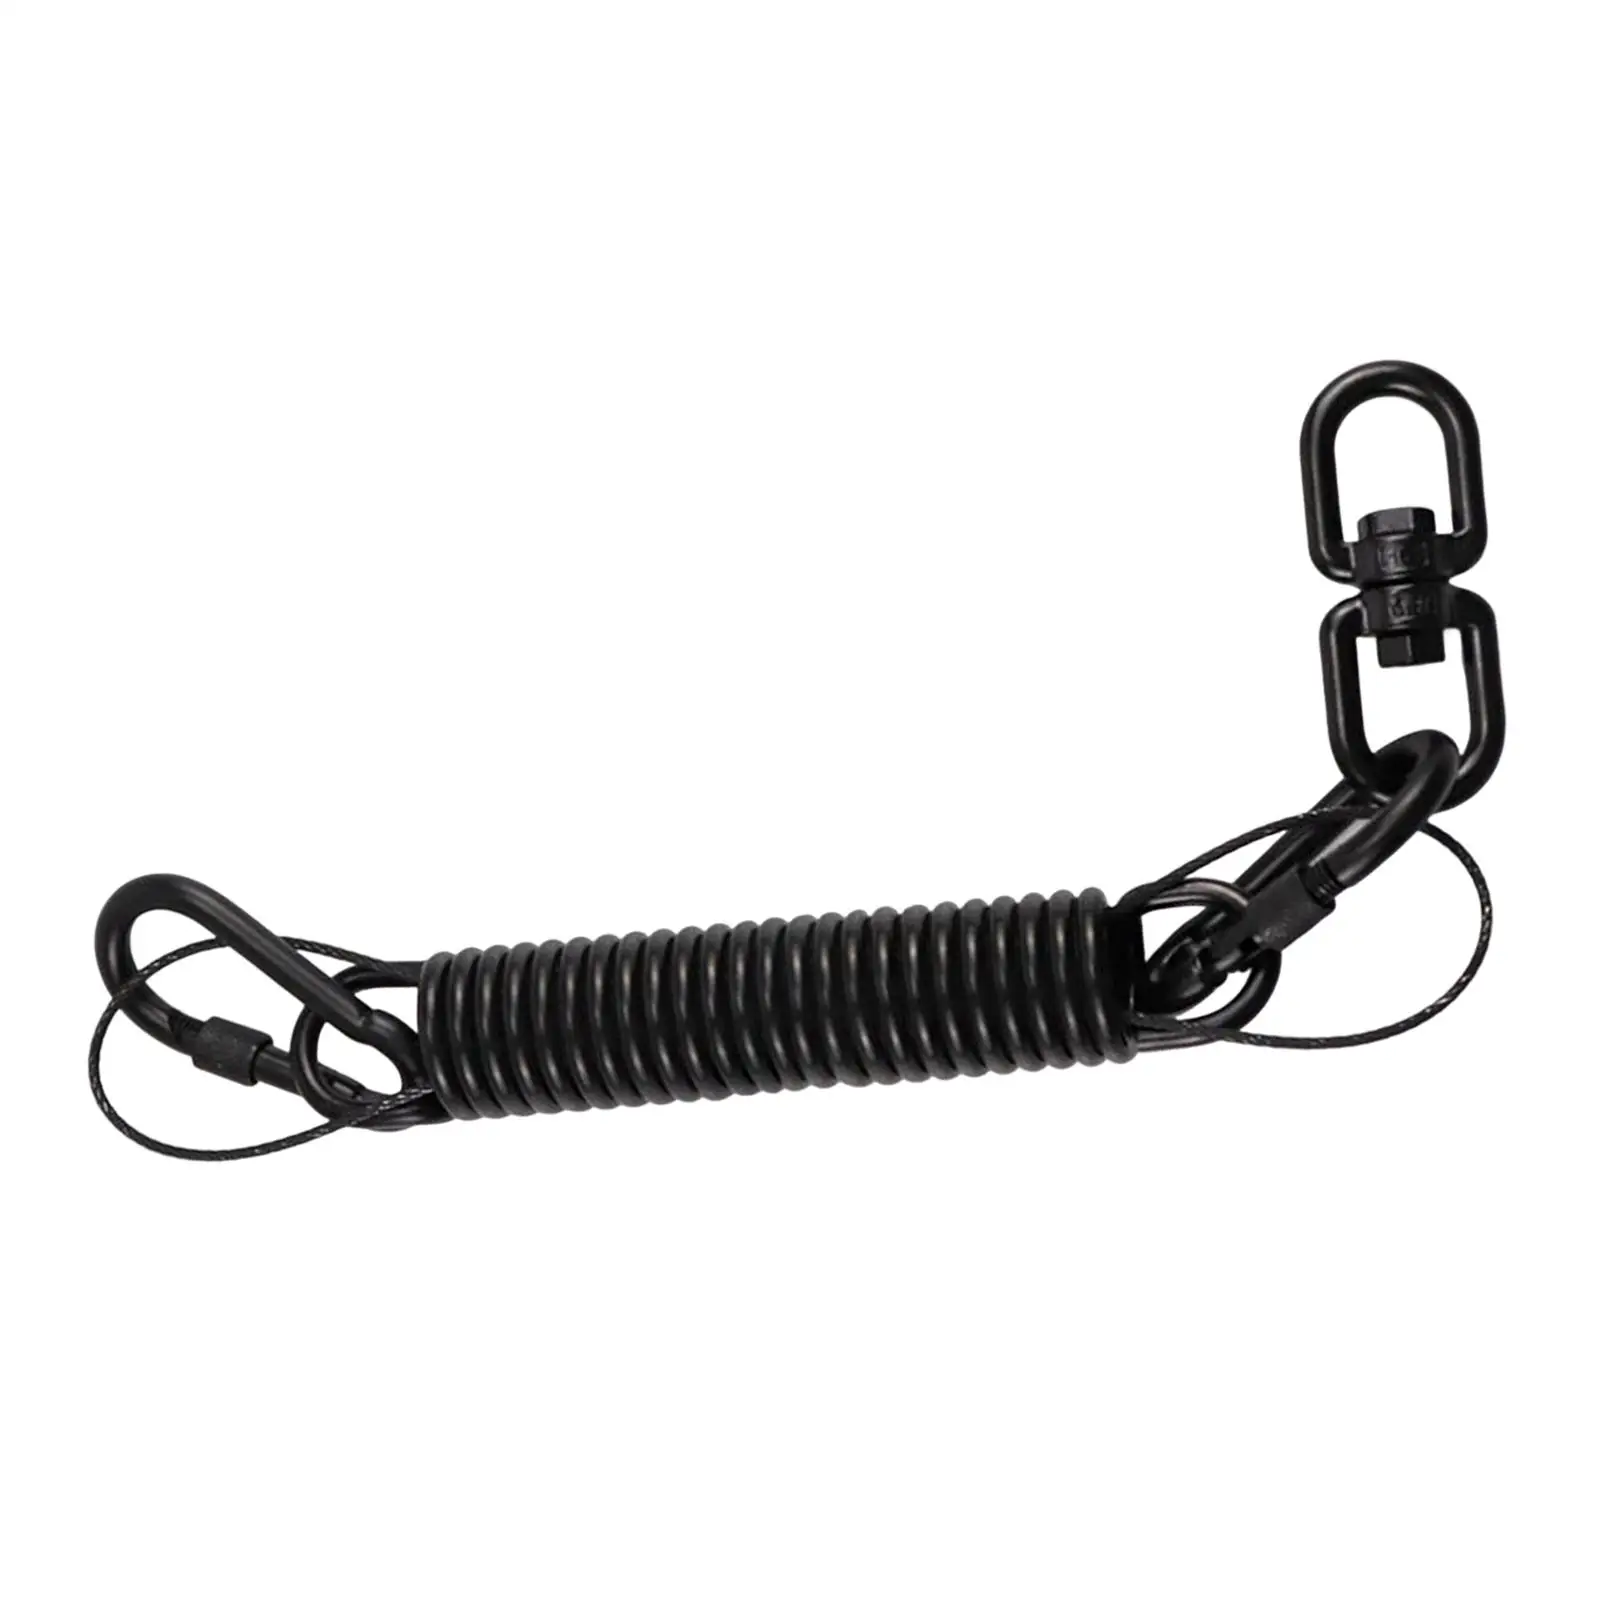 Heavy Duty Hammock Spring Durable with 2 Hooks Shock Absorbing Swing Spring for Rocking Seat Camping Punching Bags Yard